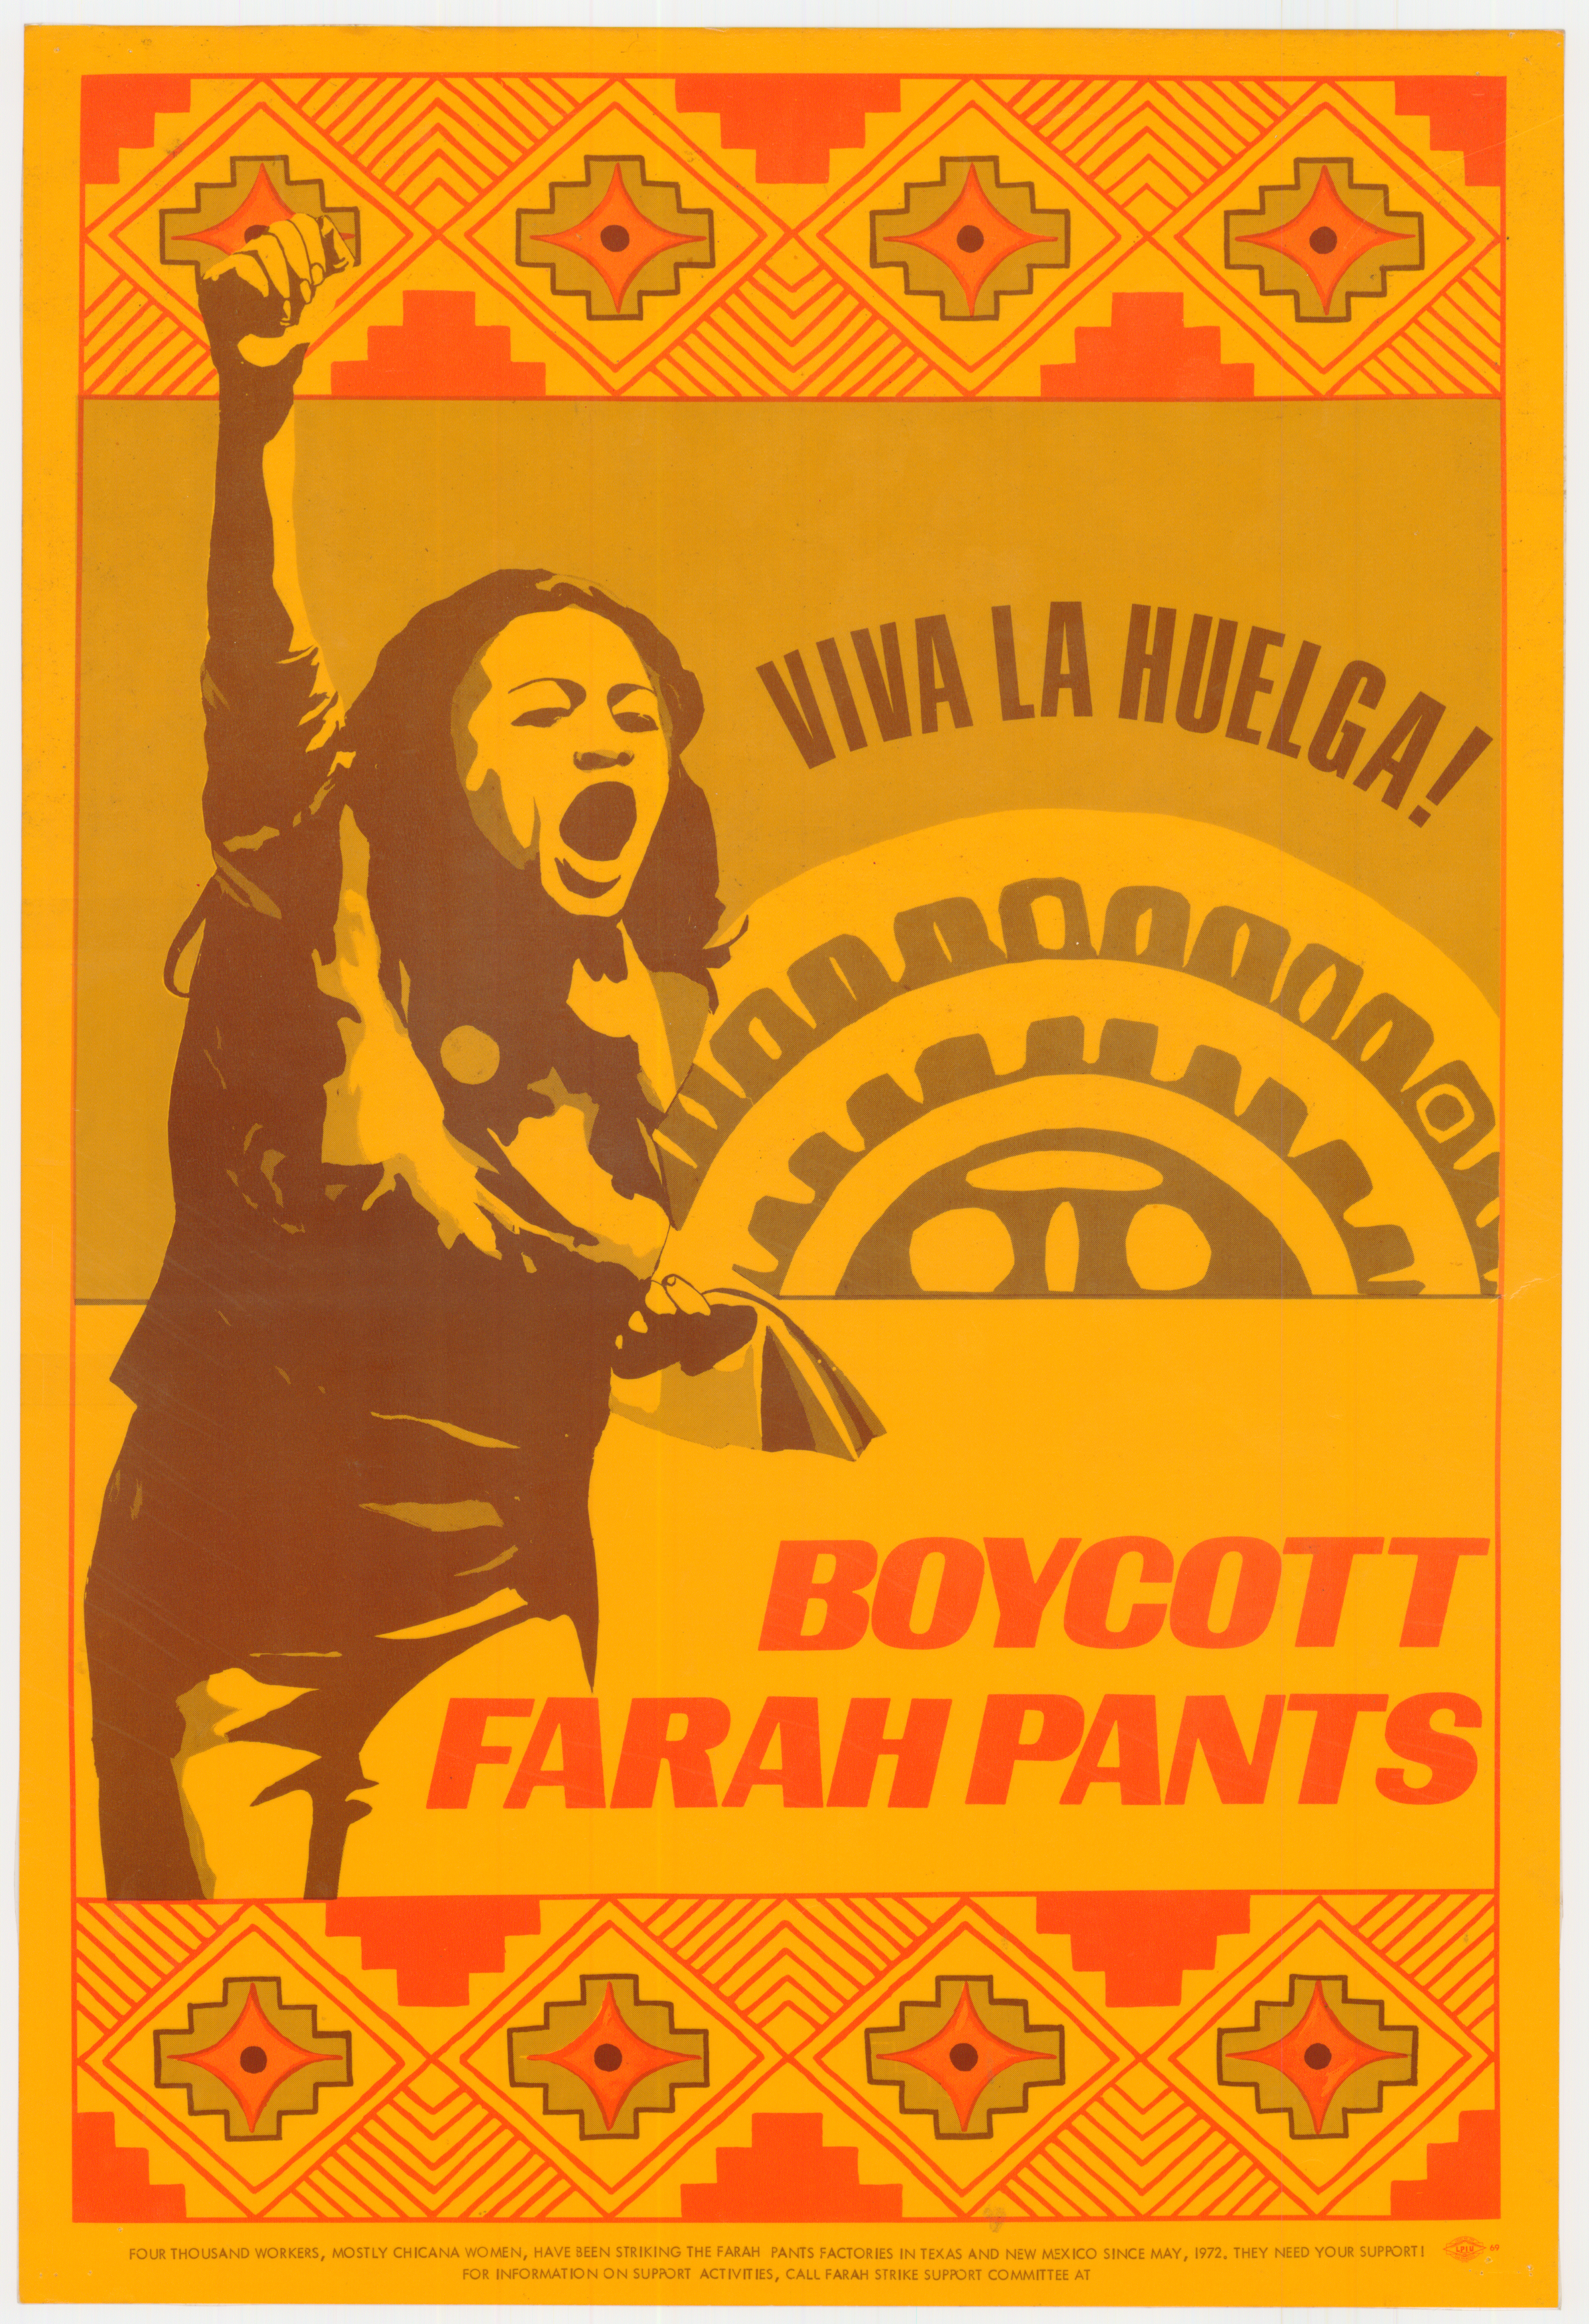 Poster of woman calling for boycott